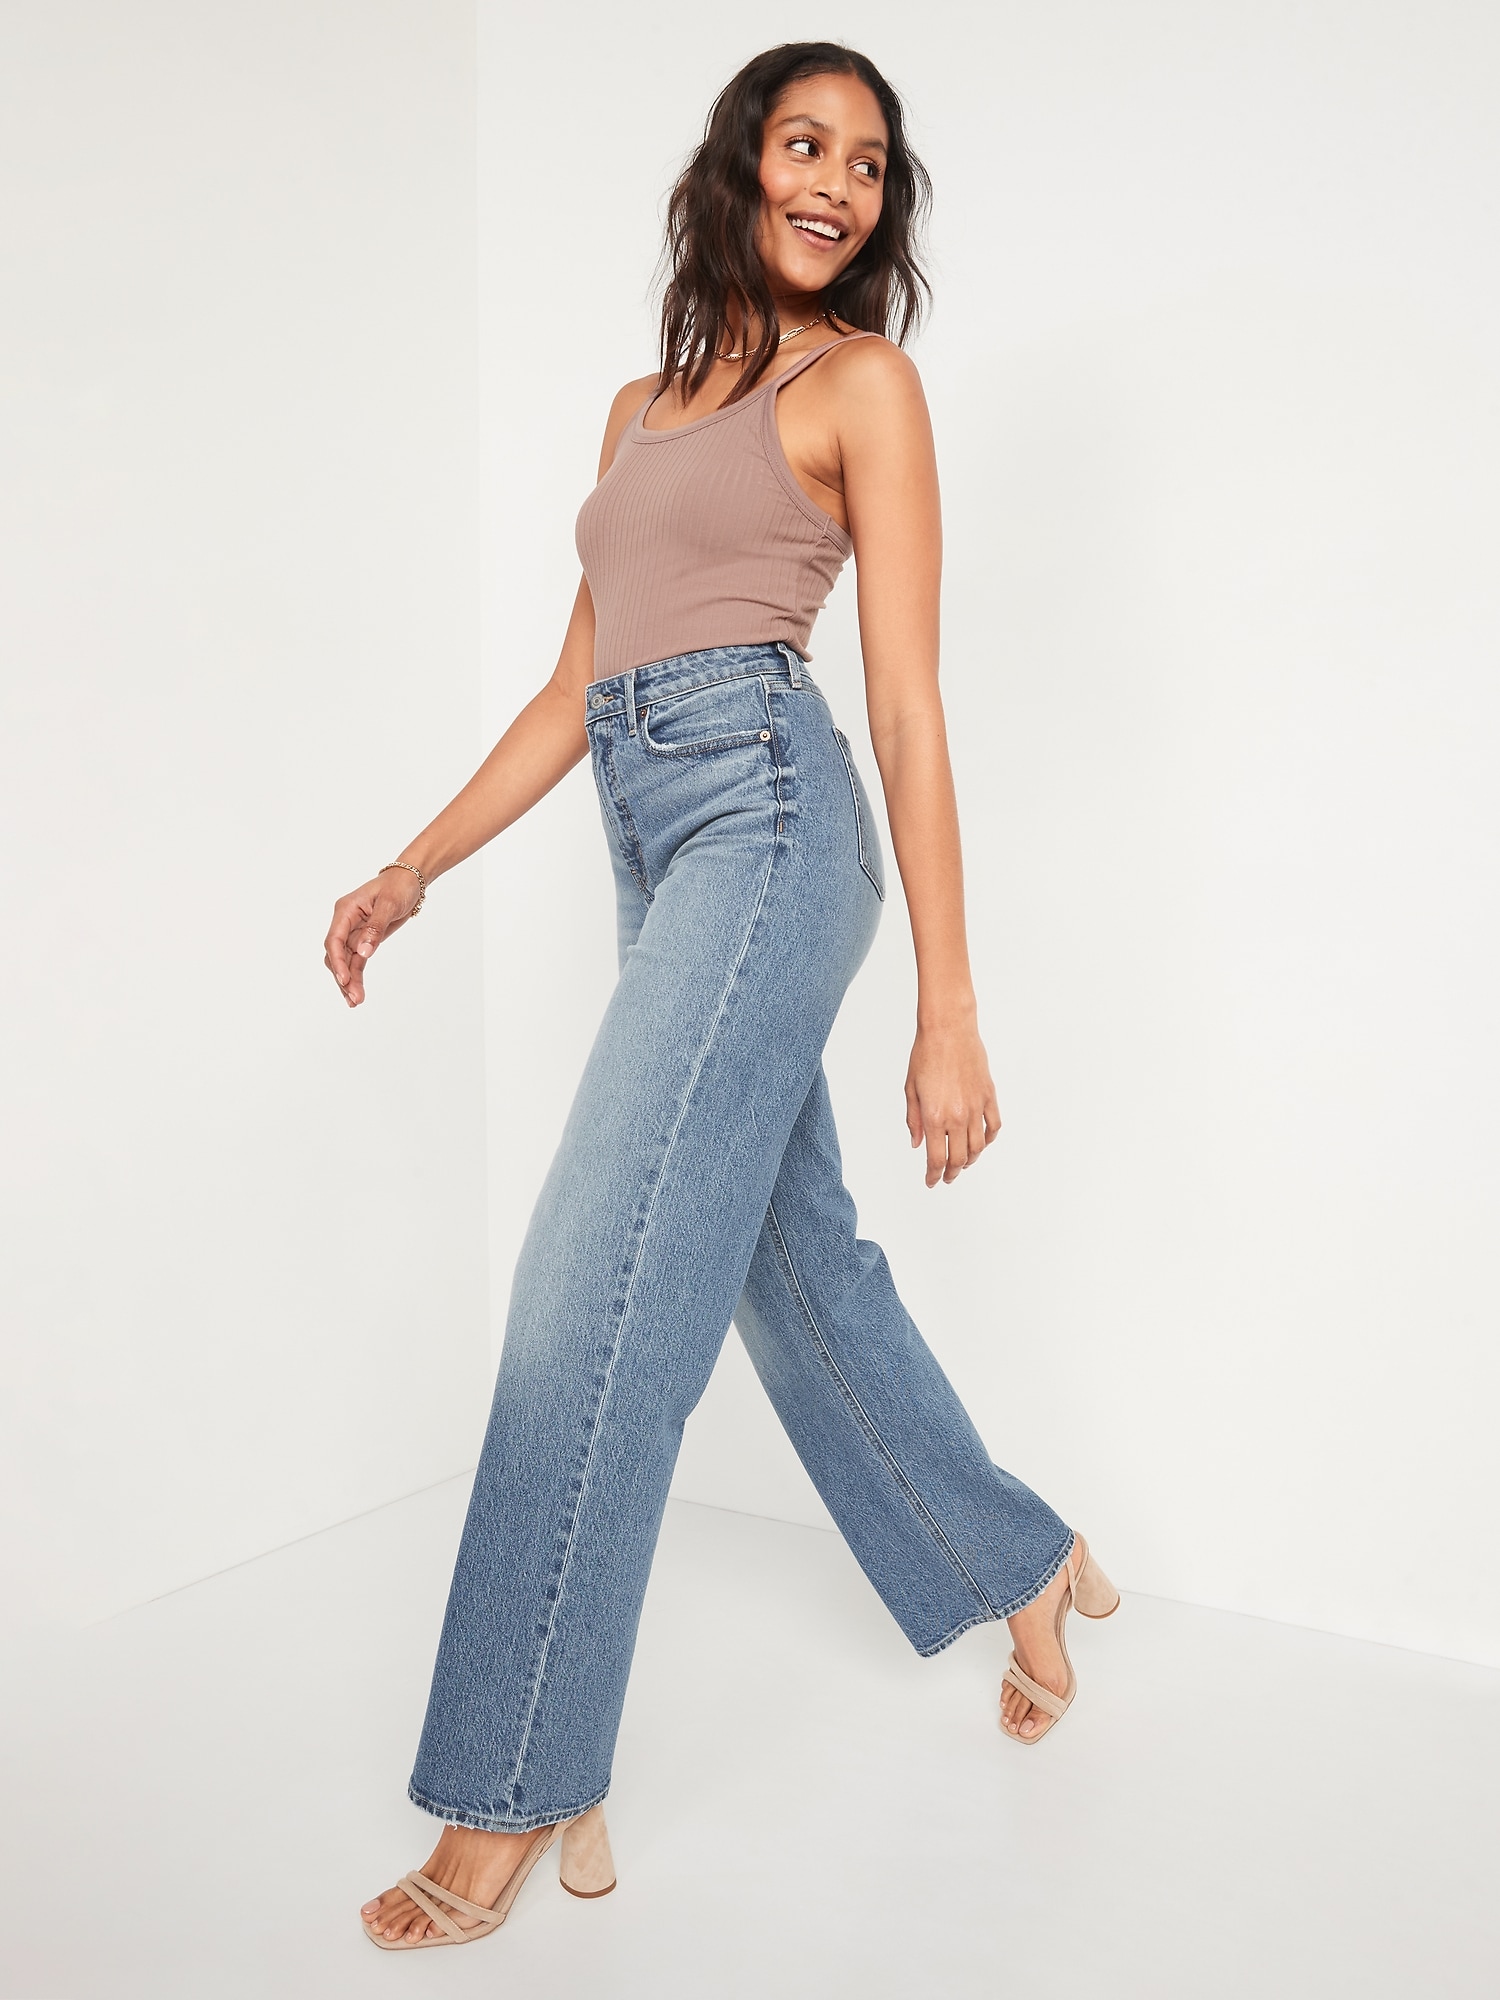 kapitalisme Uretfærdig periode Extra High-Waisted Wide-Leg Jeans for Women | Old Navy